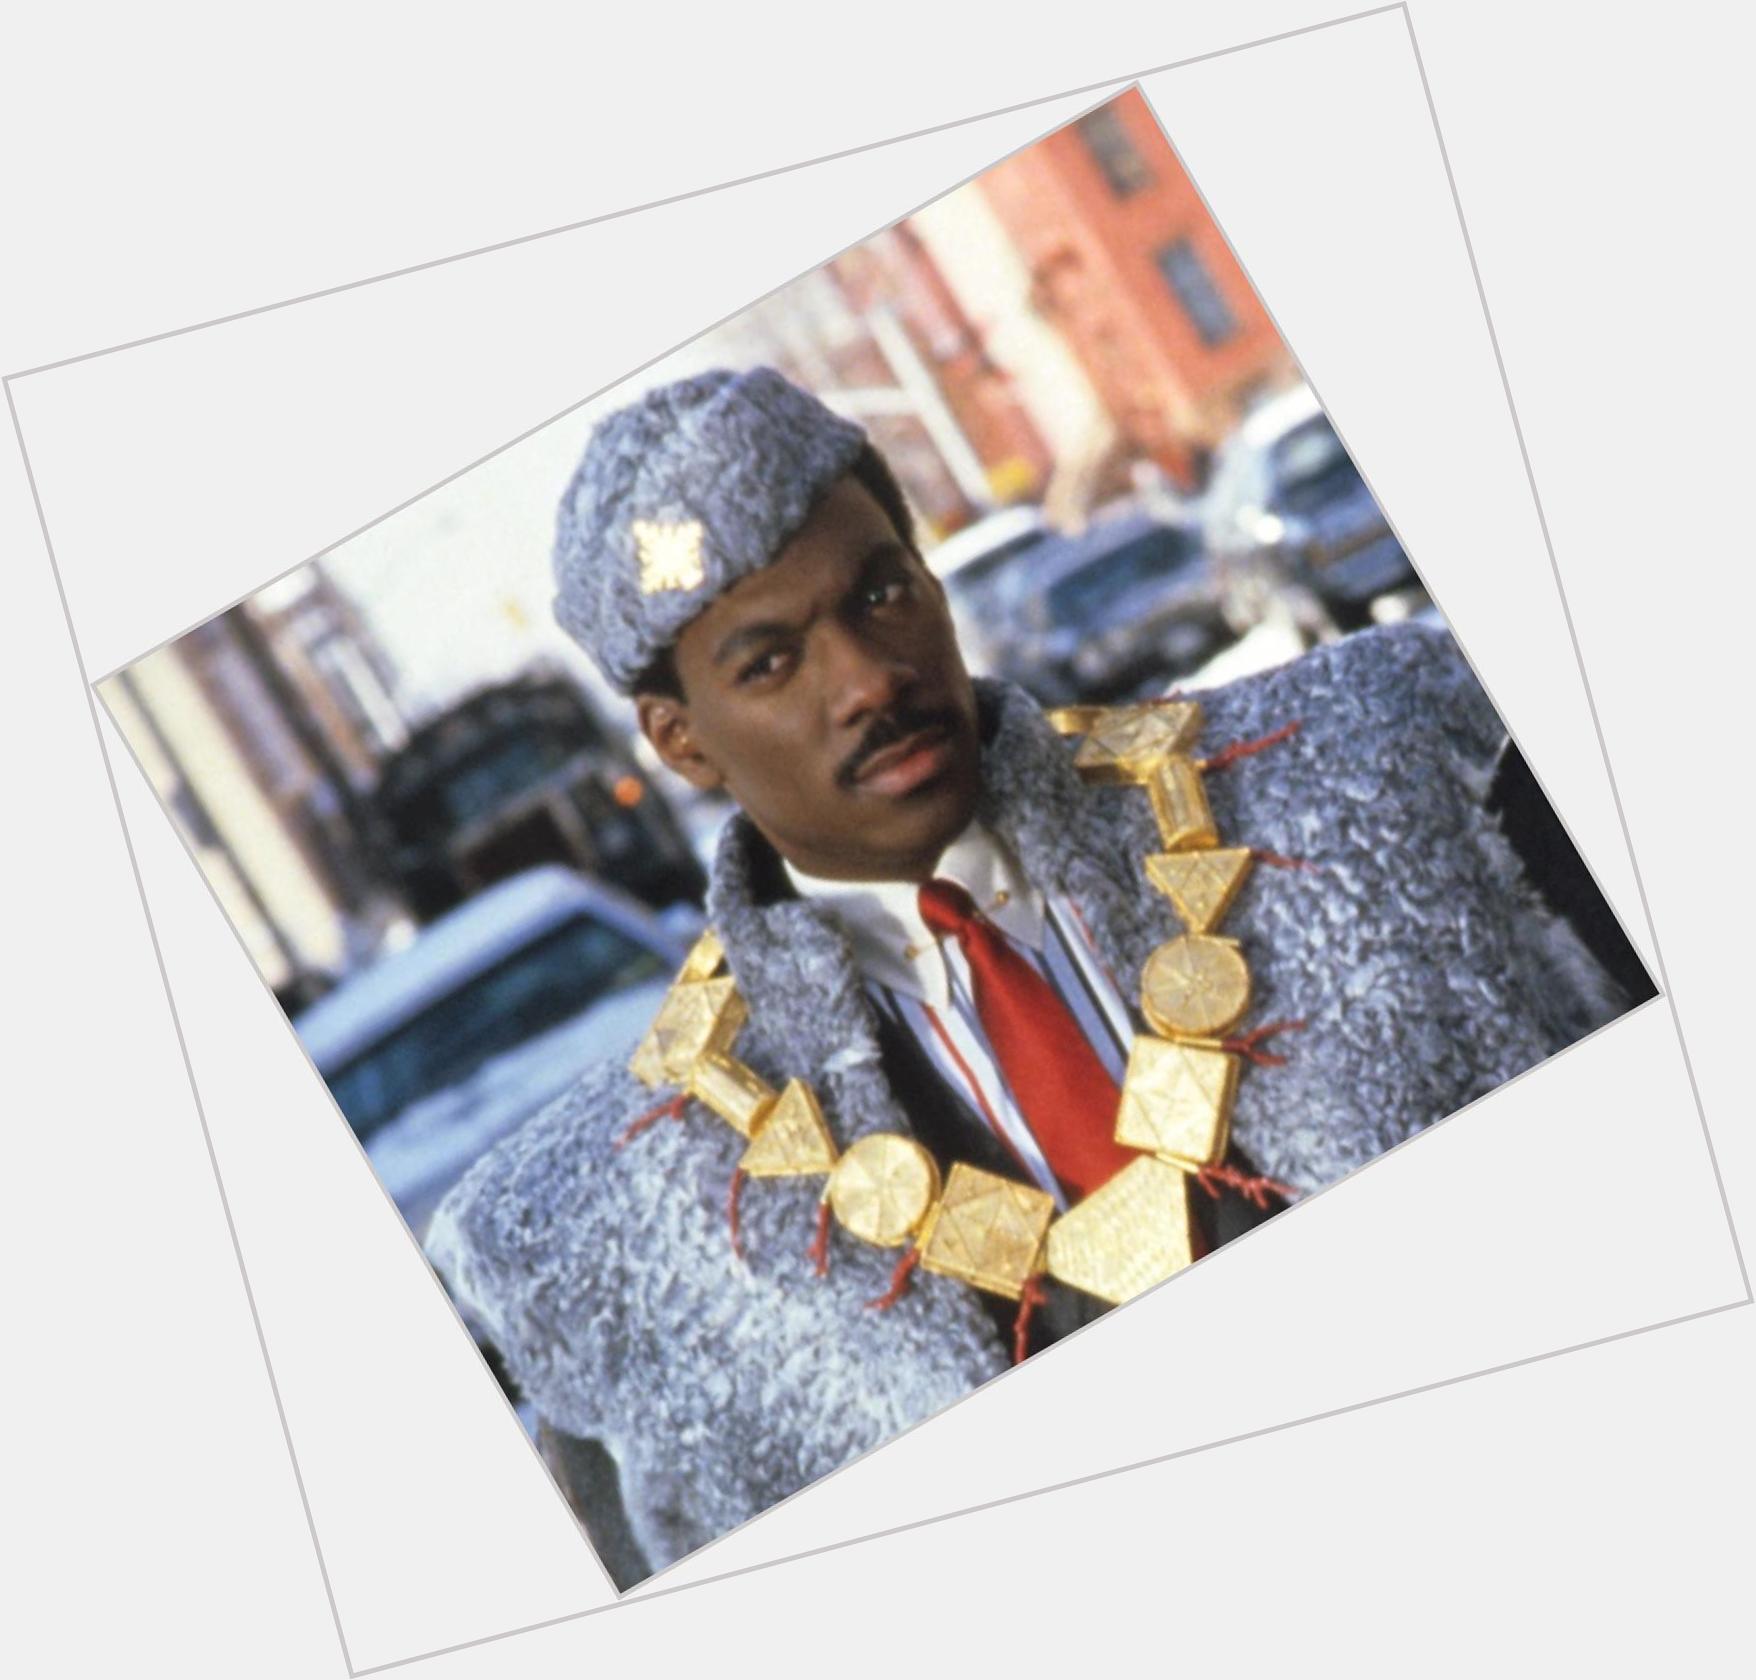 Happy 30th Birthday to Prince Hakeem and everyone in Zamunda. What\s your favorite Coming To America moment? 